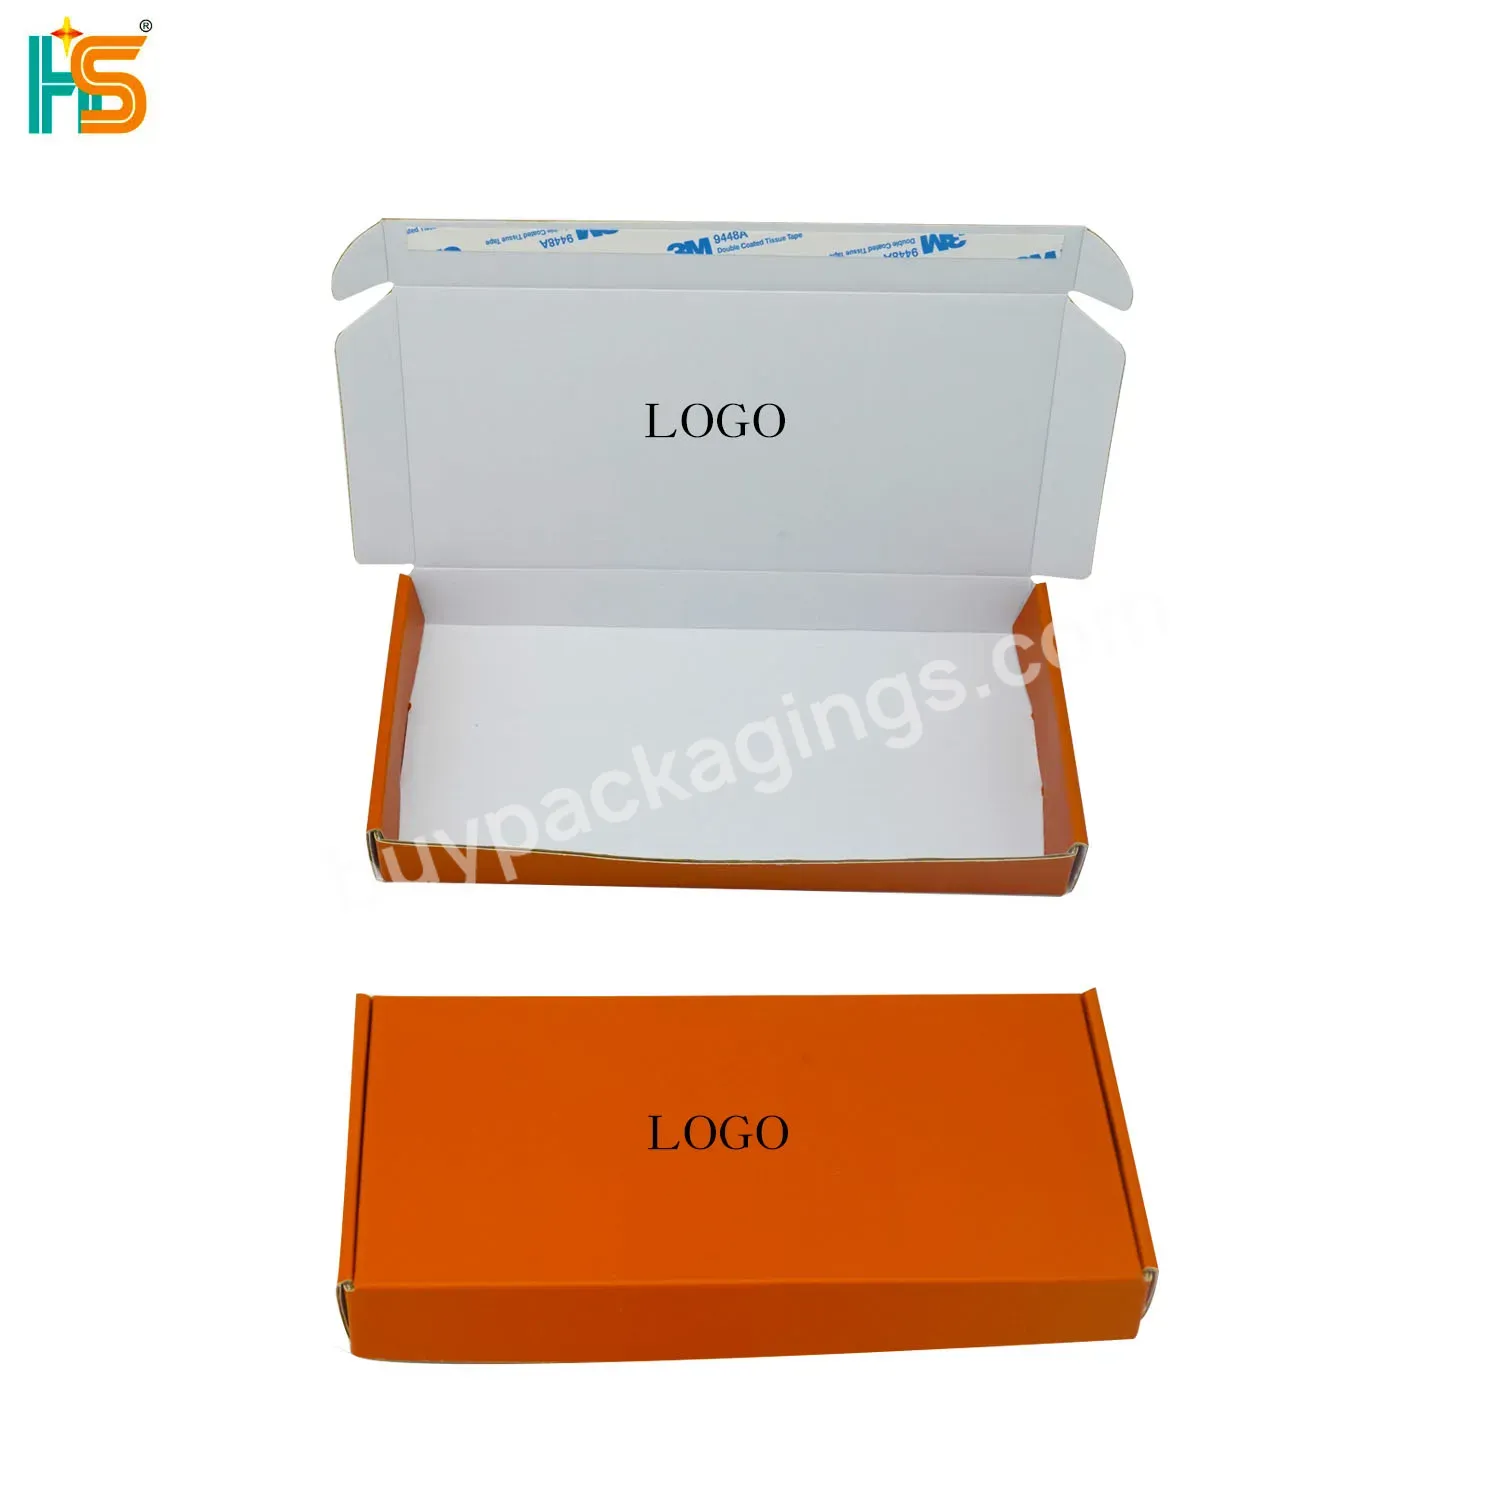 3c Electronic Products Mystery Gift Adhesive Shipping Box Mobile Phone Accessories Packing Box